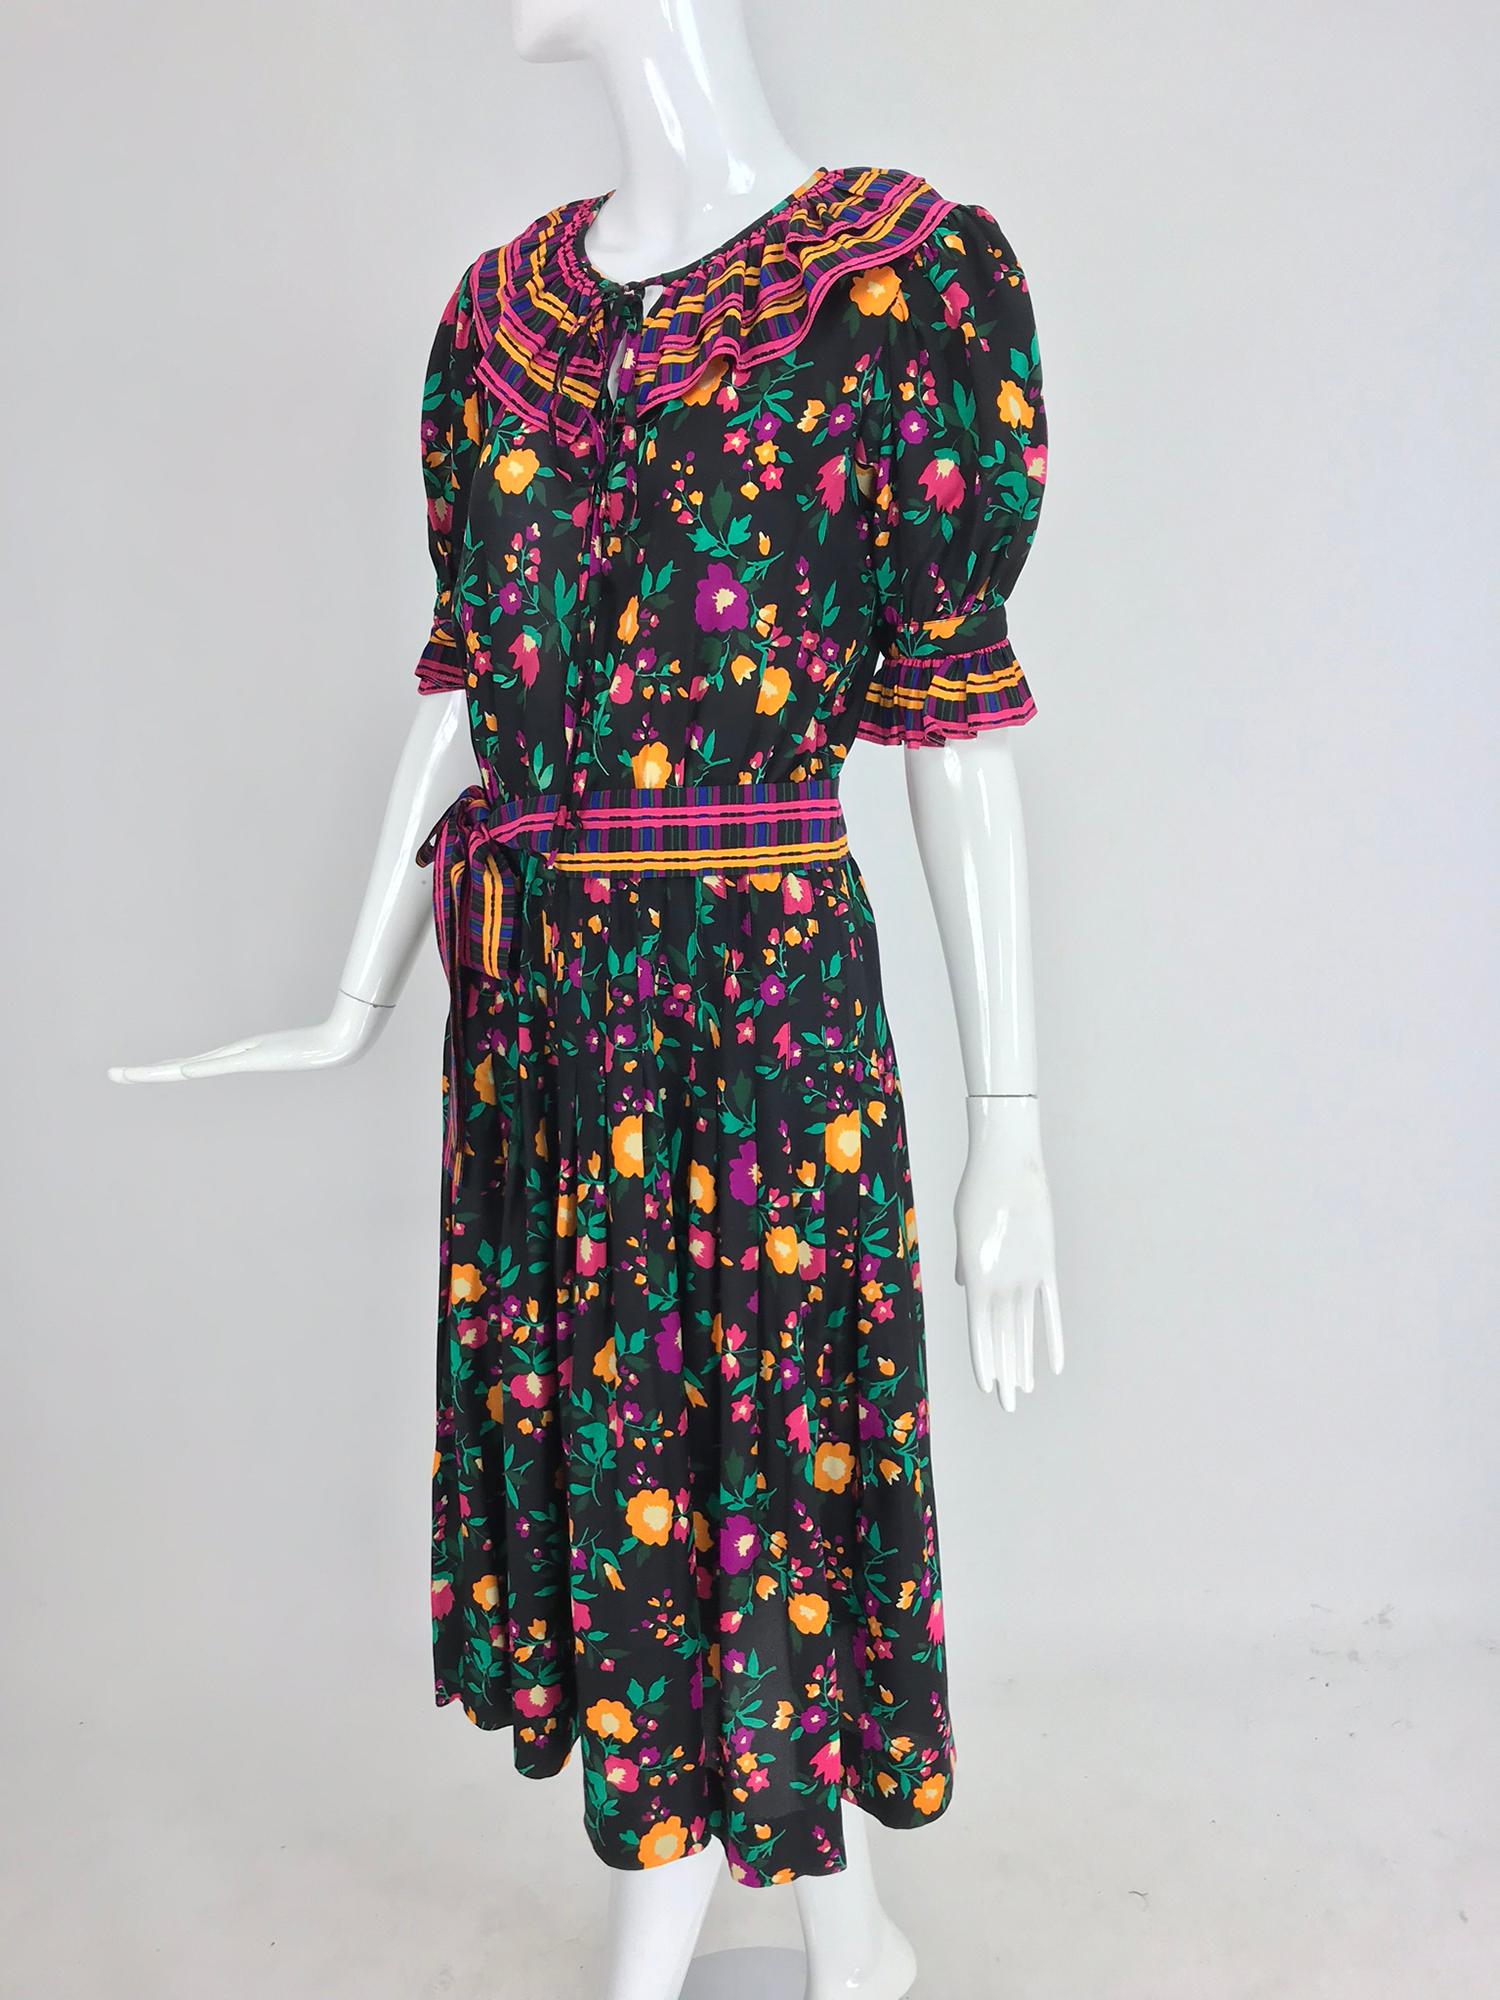 Yves Saint Laurent Rive Gauche silk floral mix print dress from the 1970s. Vibrant floral print set on a black ground with coordinating stripes make this eye catching dress perfect for anytime you want to look fabulous. Pull on dress has a peasant